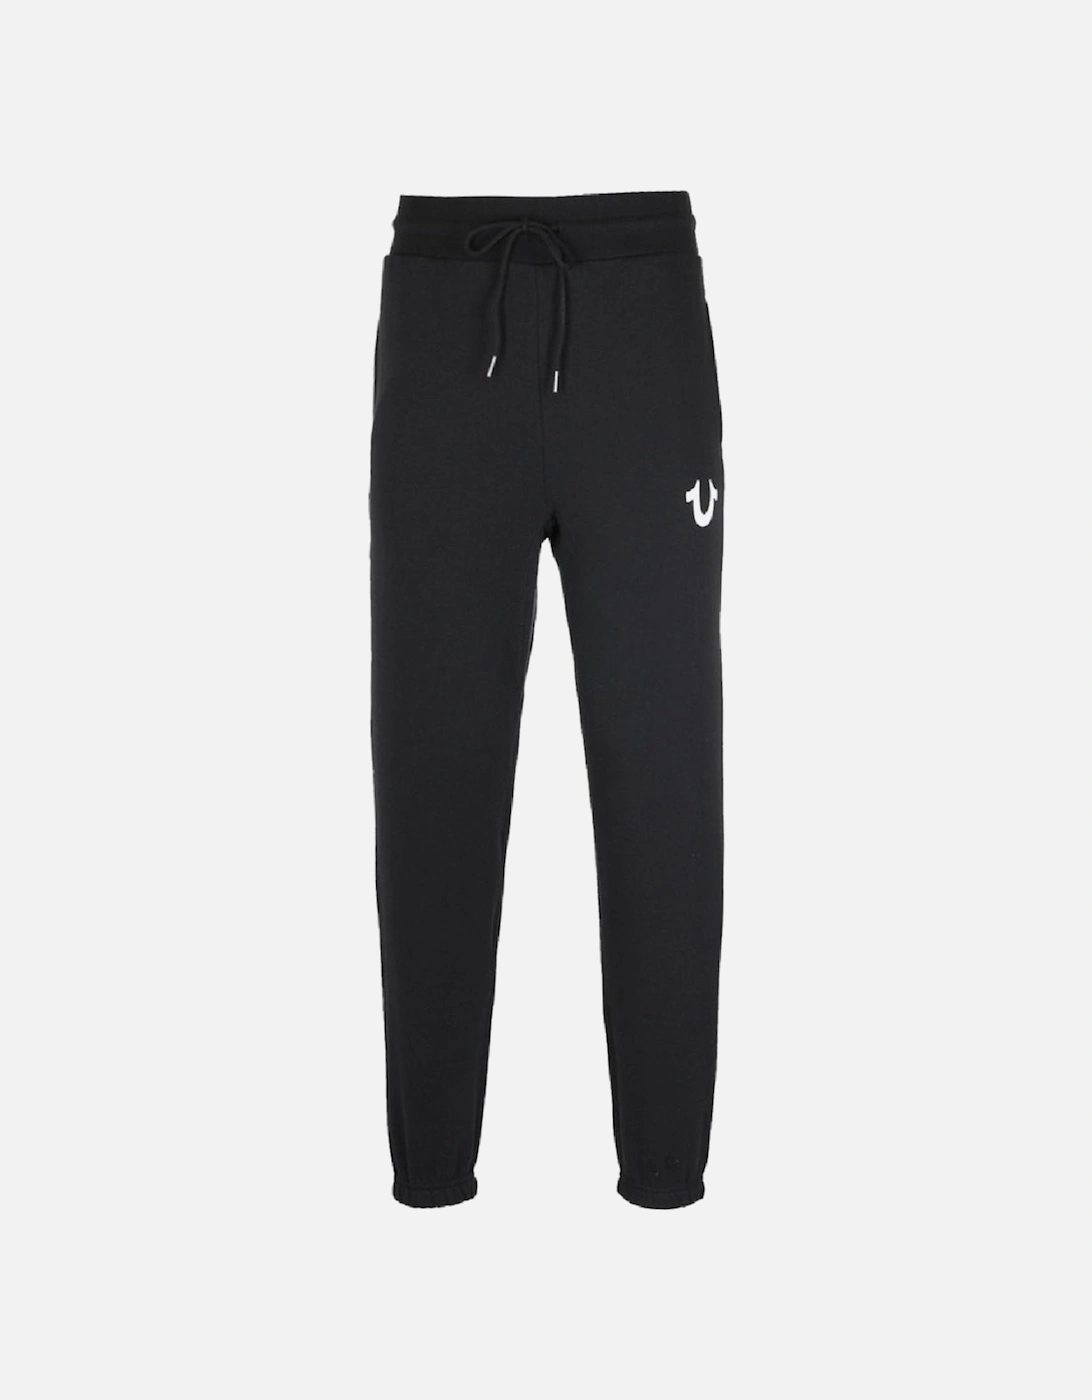 Lullaby Jogger Black Sweatpants, 3 of 2